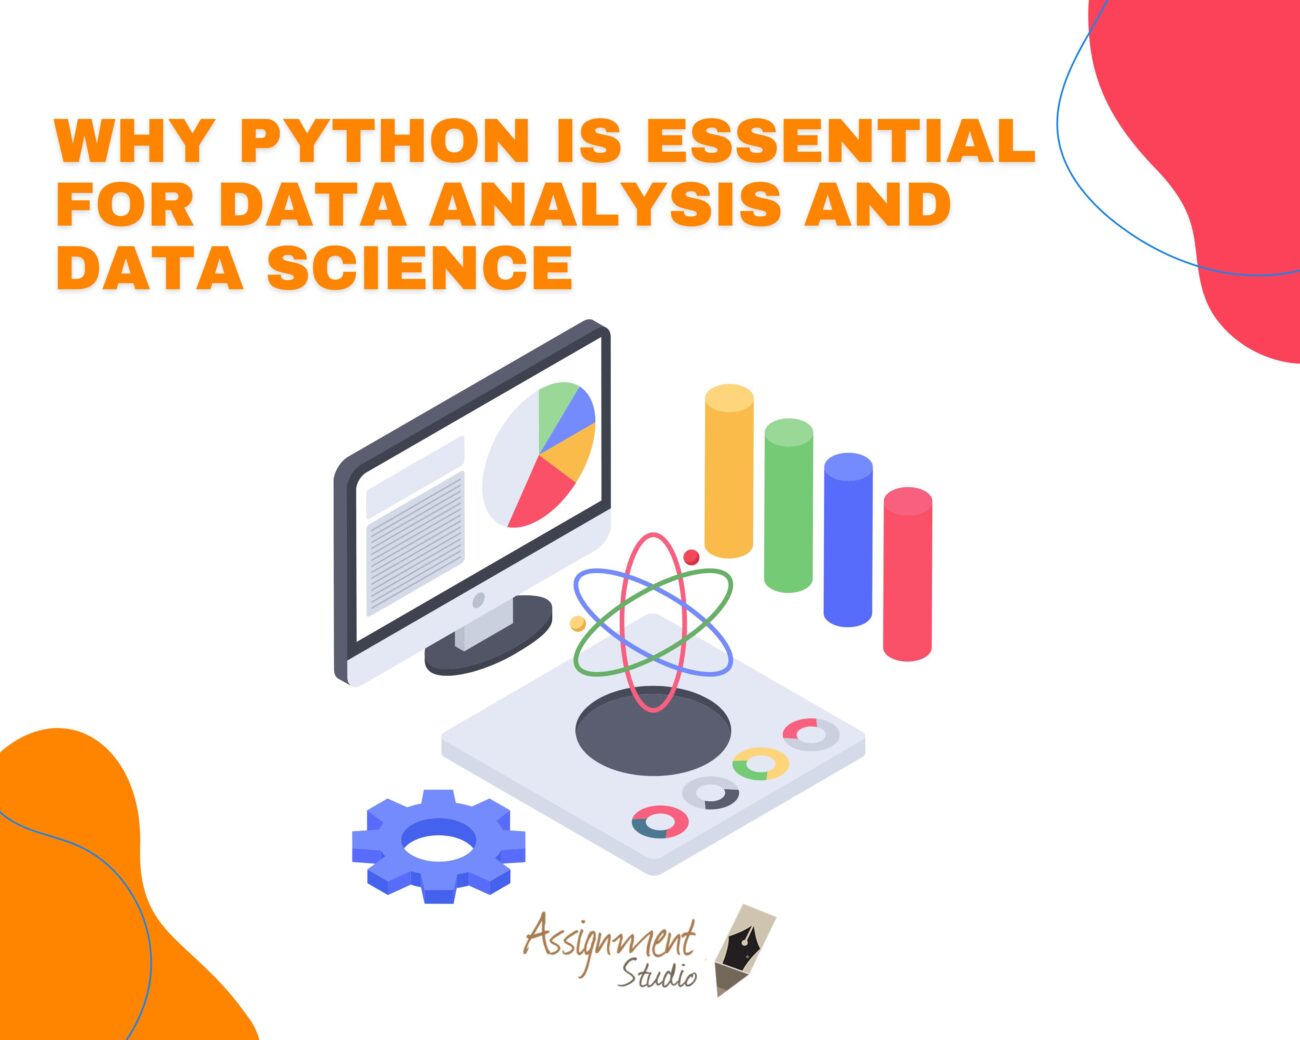 Why Python is Essential for Data Analysis and Data Science